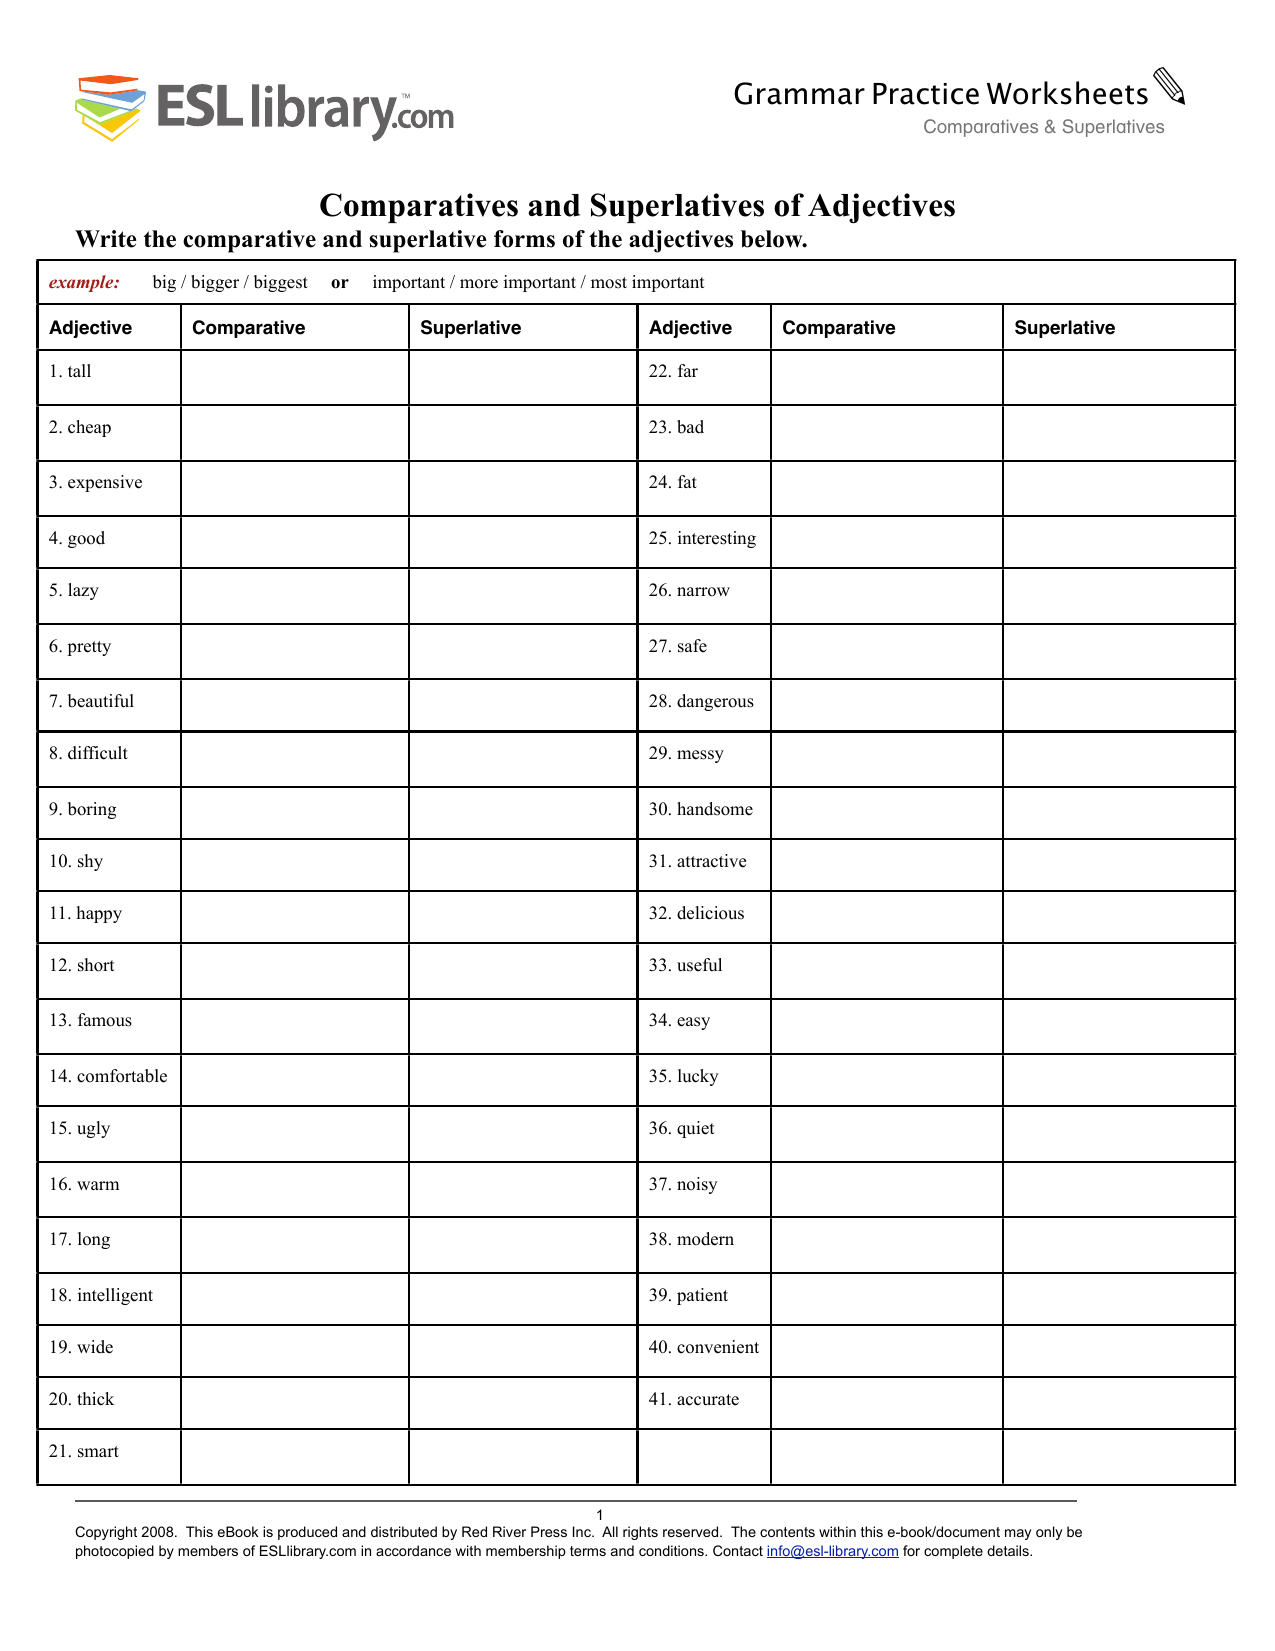 Comparative And Superlative Forms Of Adjectives Worksheets